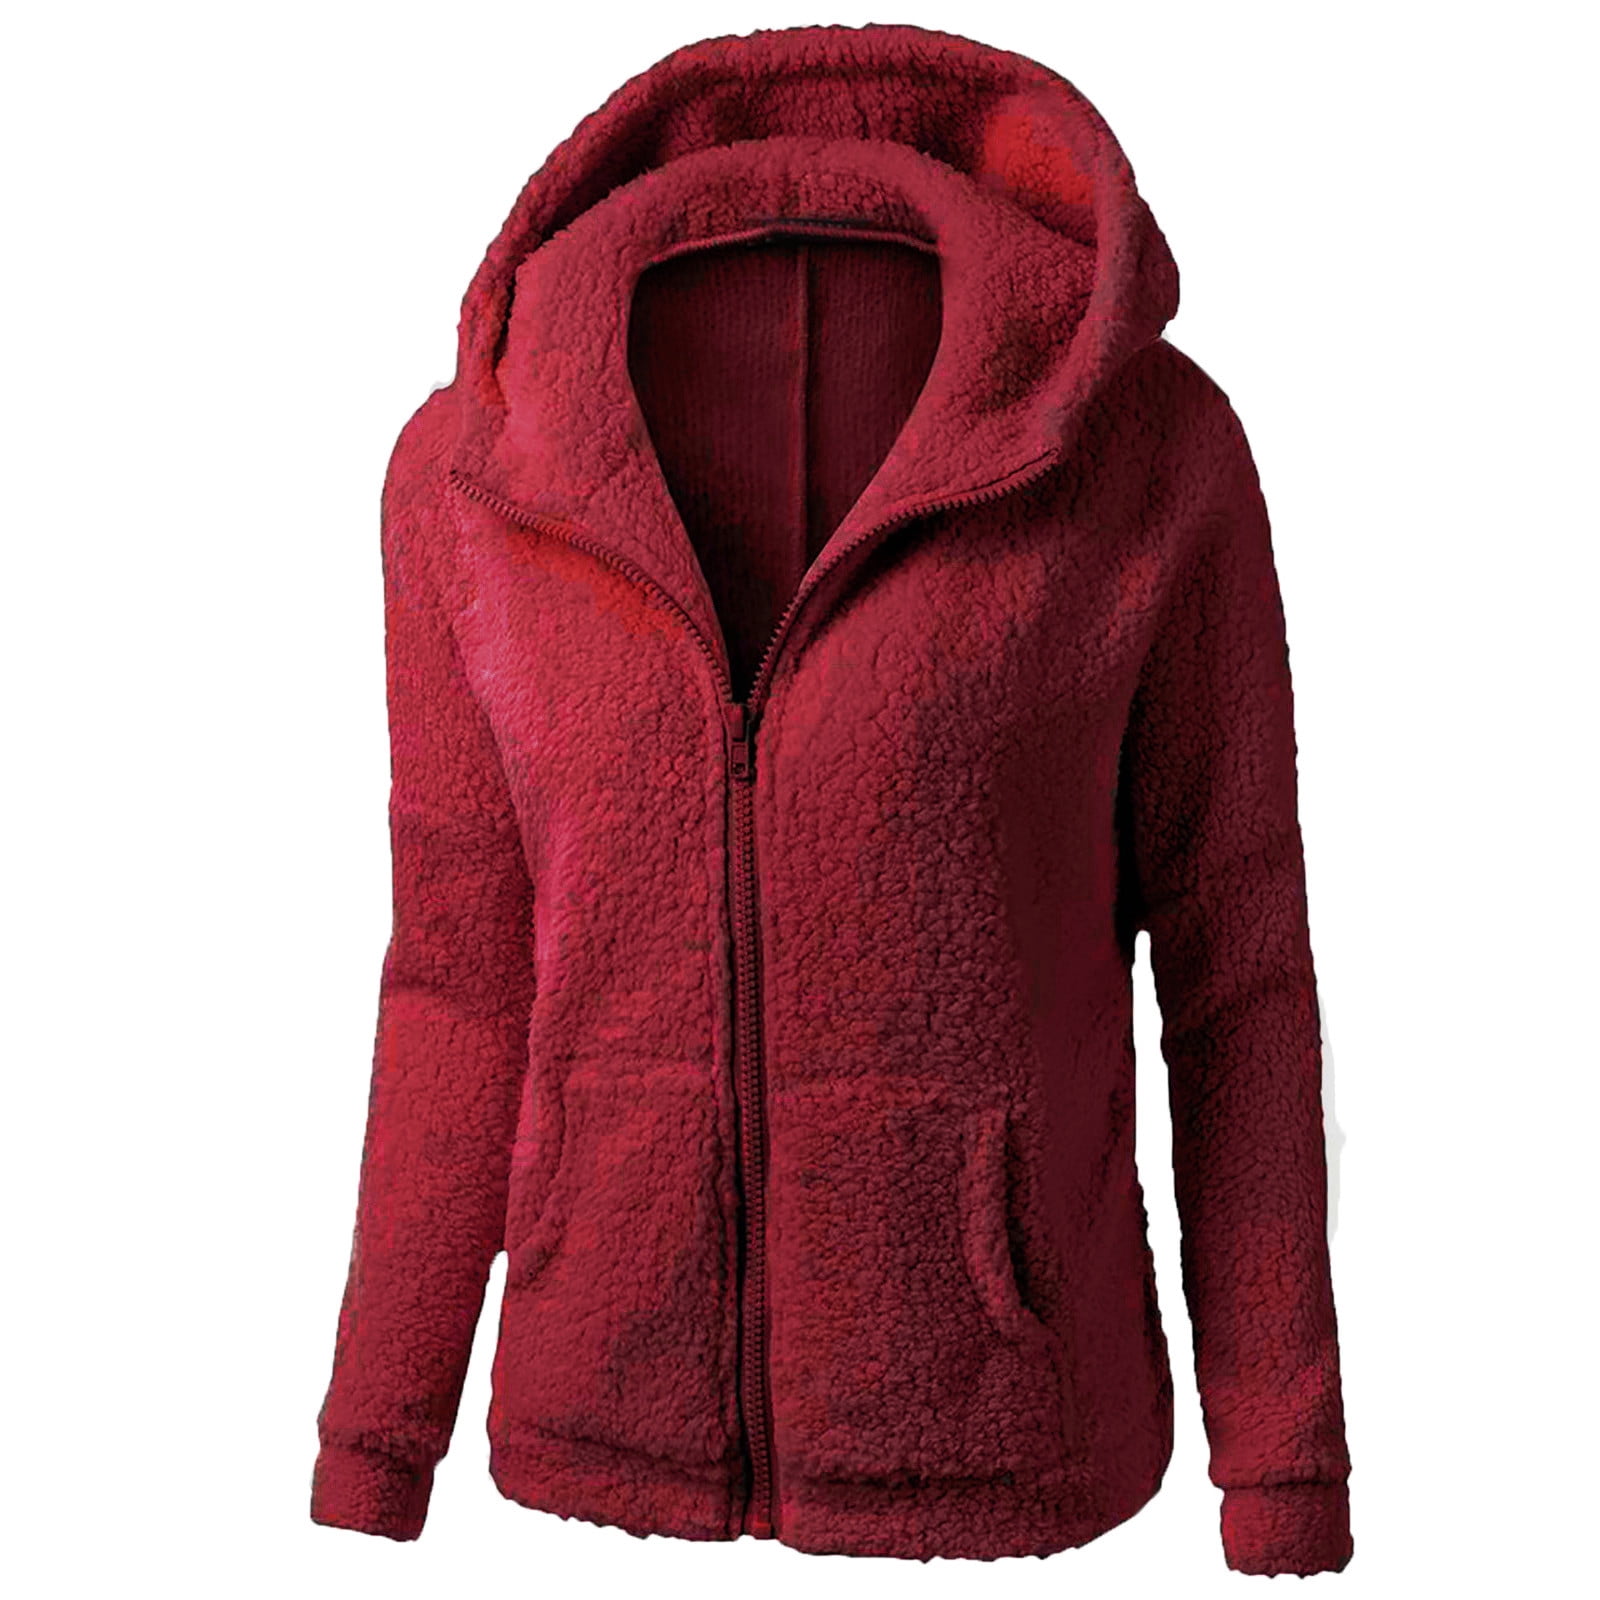 BUIgtTklOP No Boundaries European And American Plush Sweaters For Women ...